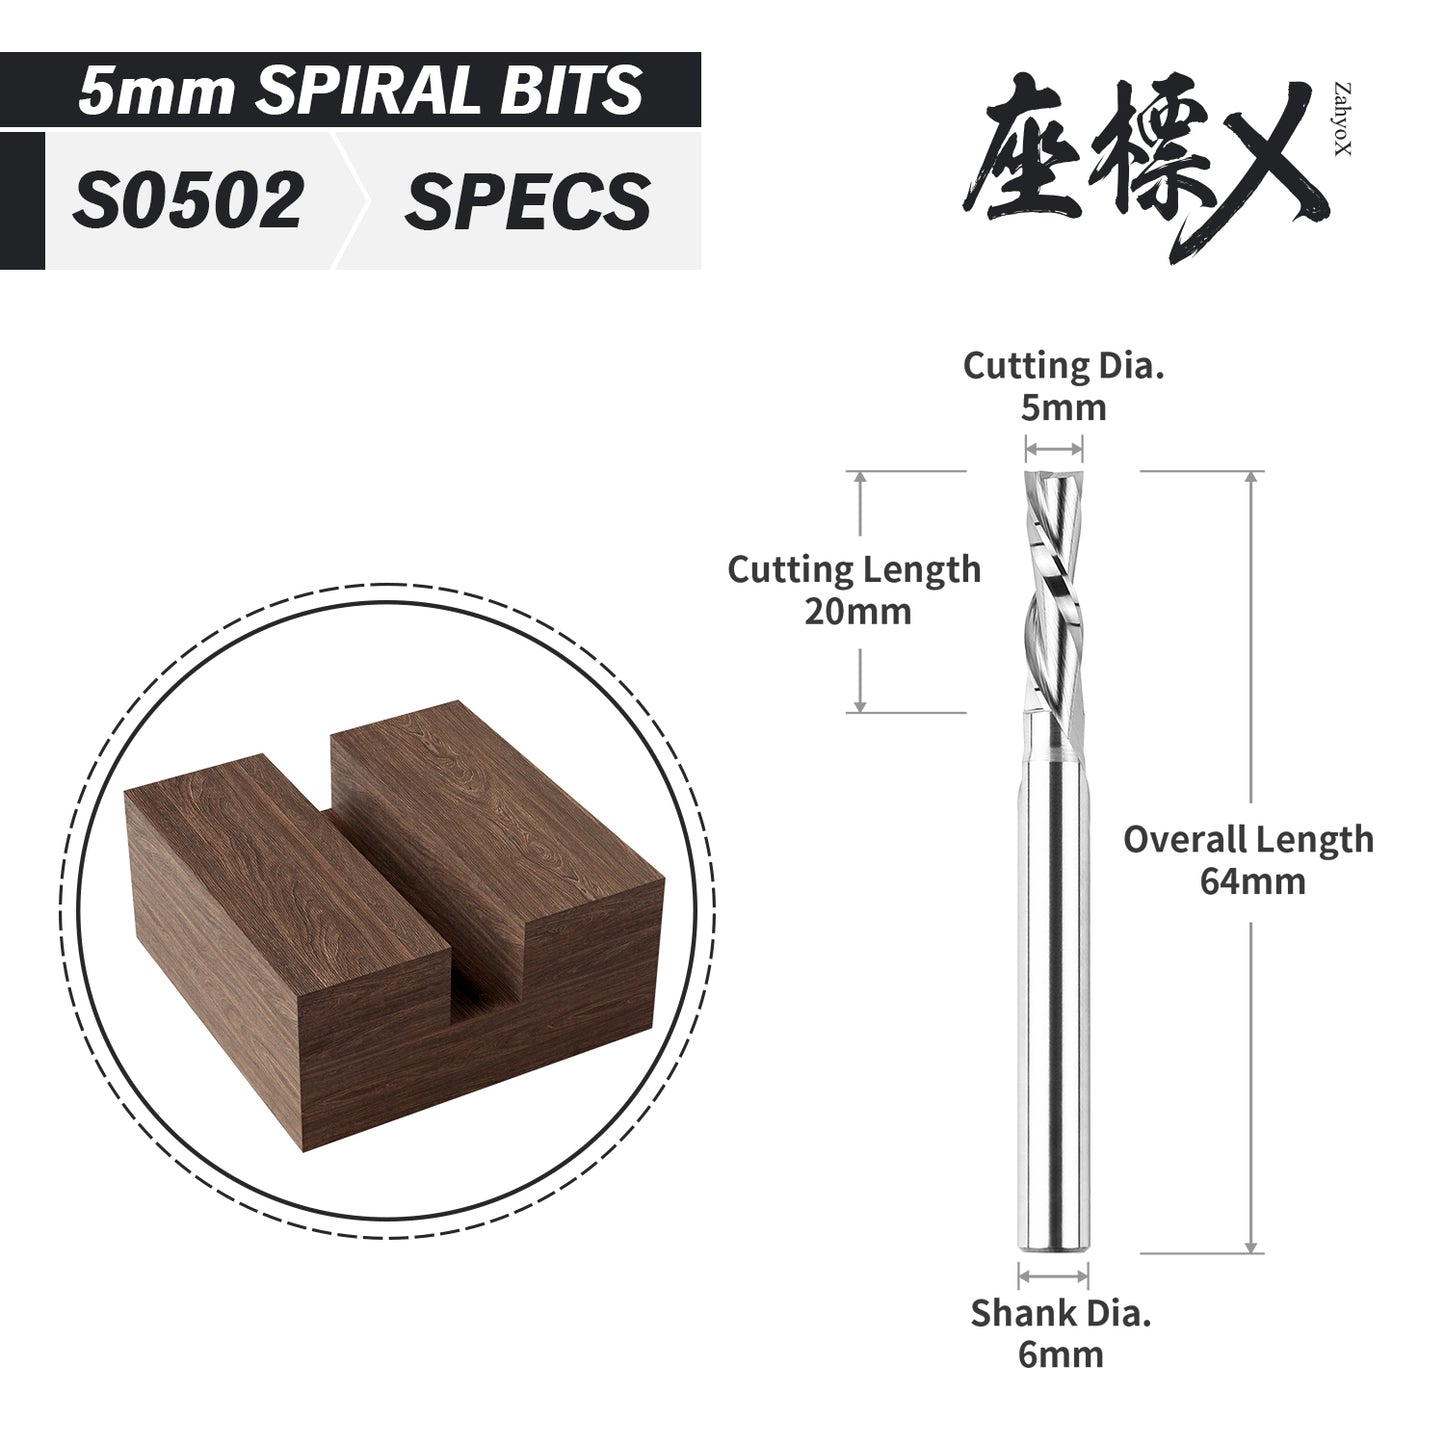 S0502 Solid Carbide Metric Downcut Spiral Router Bit - 2 Flutes  - 6mm SD - 5mm CD - 20mm CL - 64mm OL